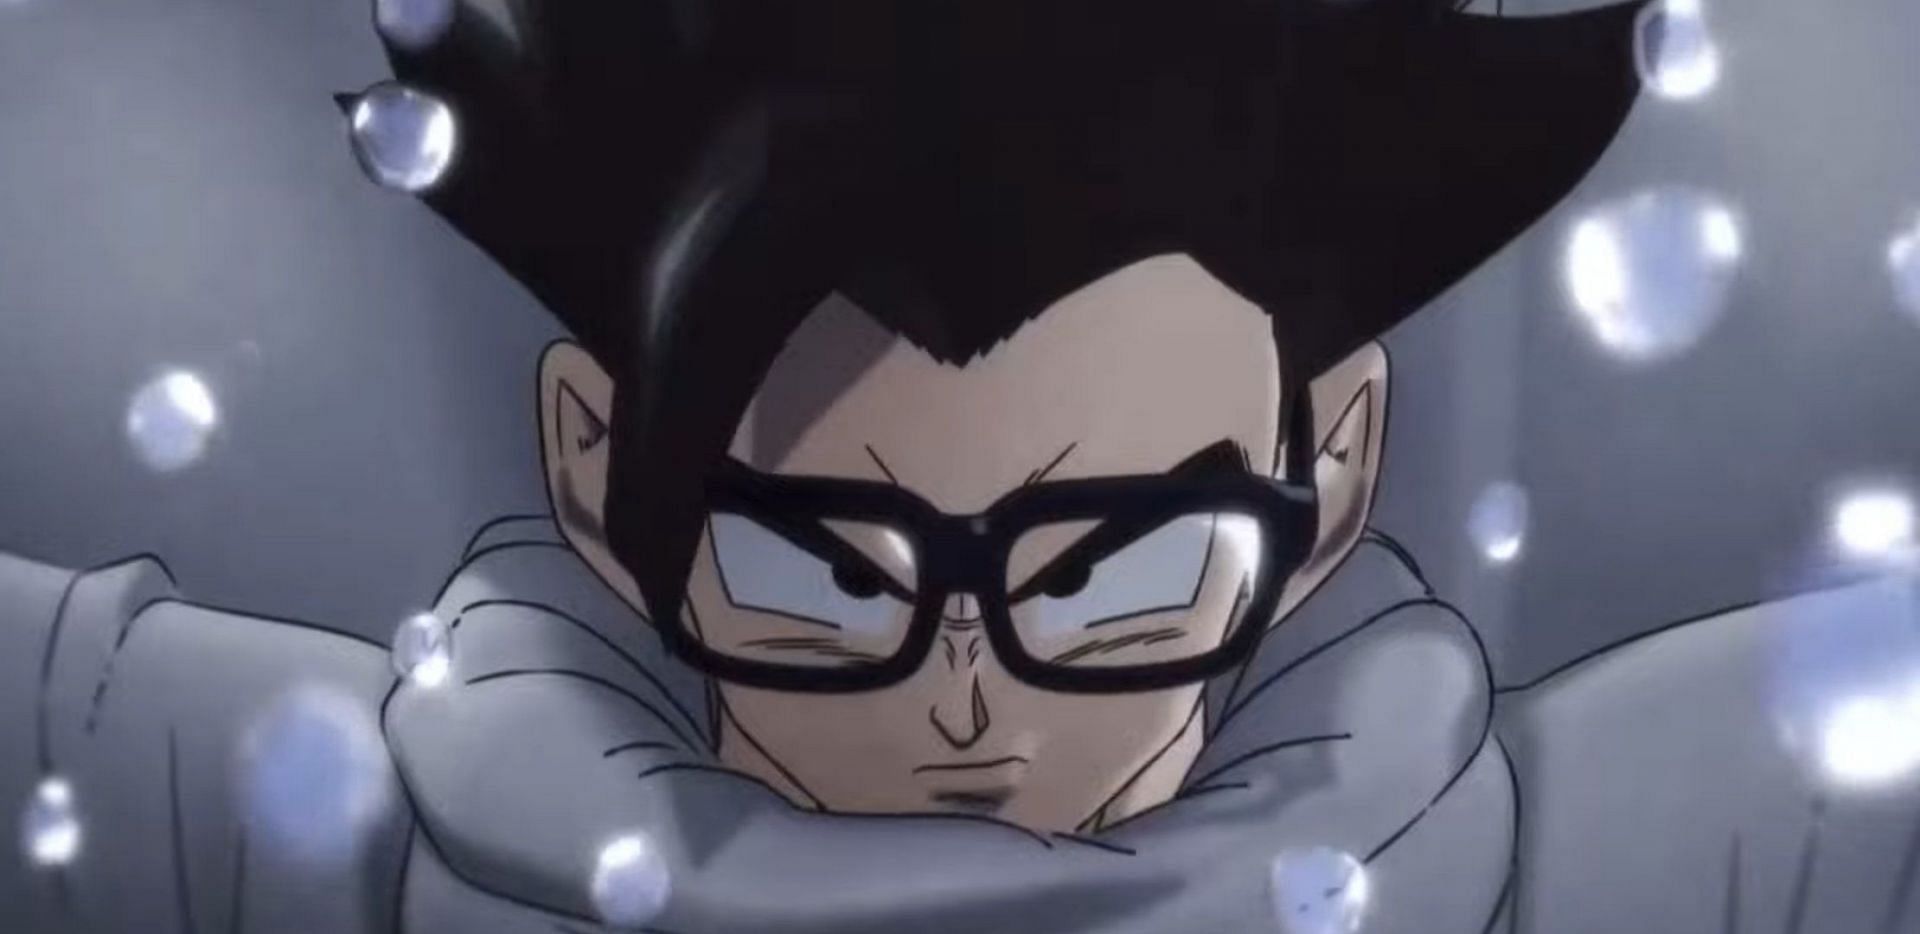 Gohan as seen in the Dragon Ball Super: Super Hero second trailer. (Image via Toei Animation)